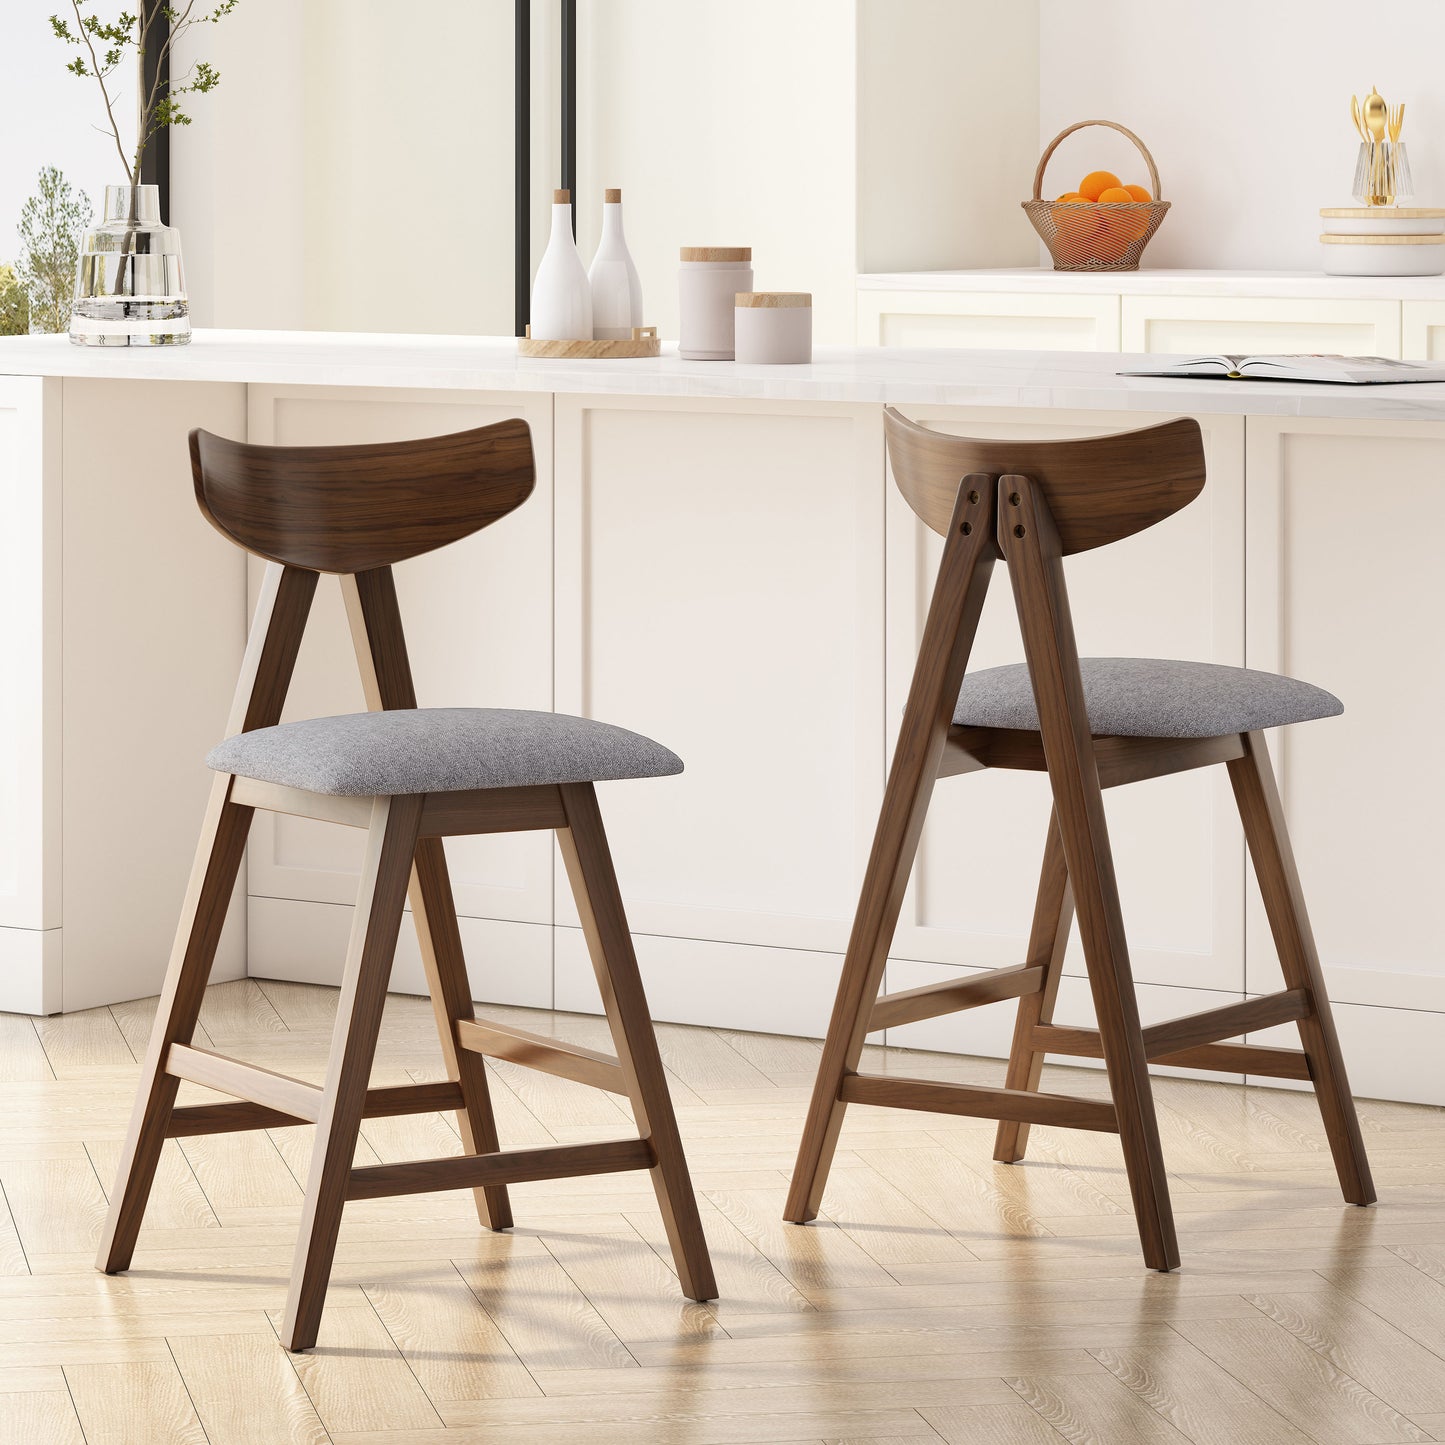 Sunapee Mid Century Modern Fabric Upholstered Wood 25 Inch Counter Stools (Set of 2)